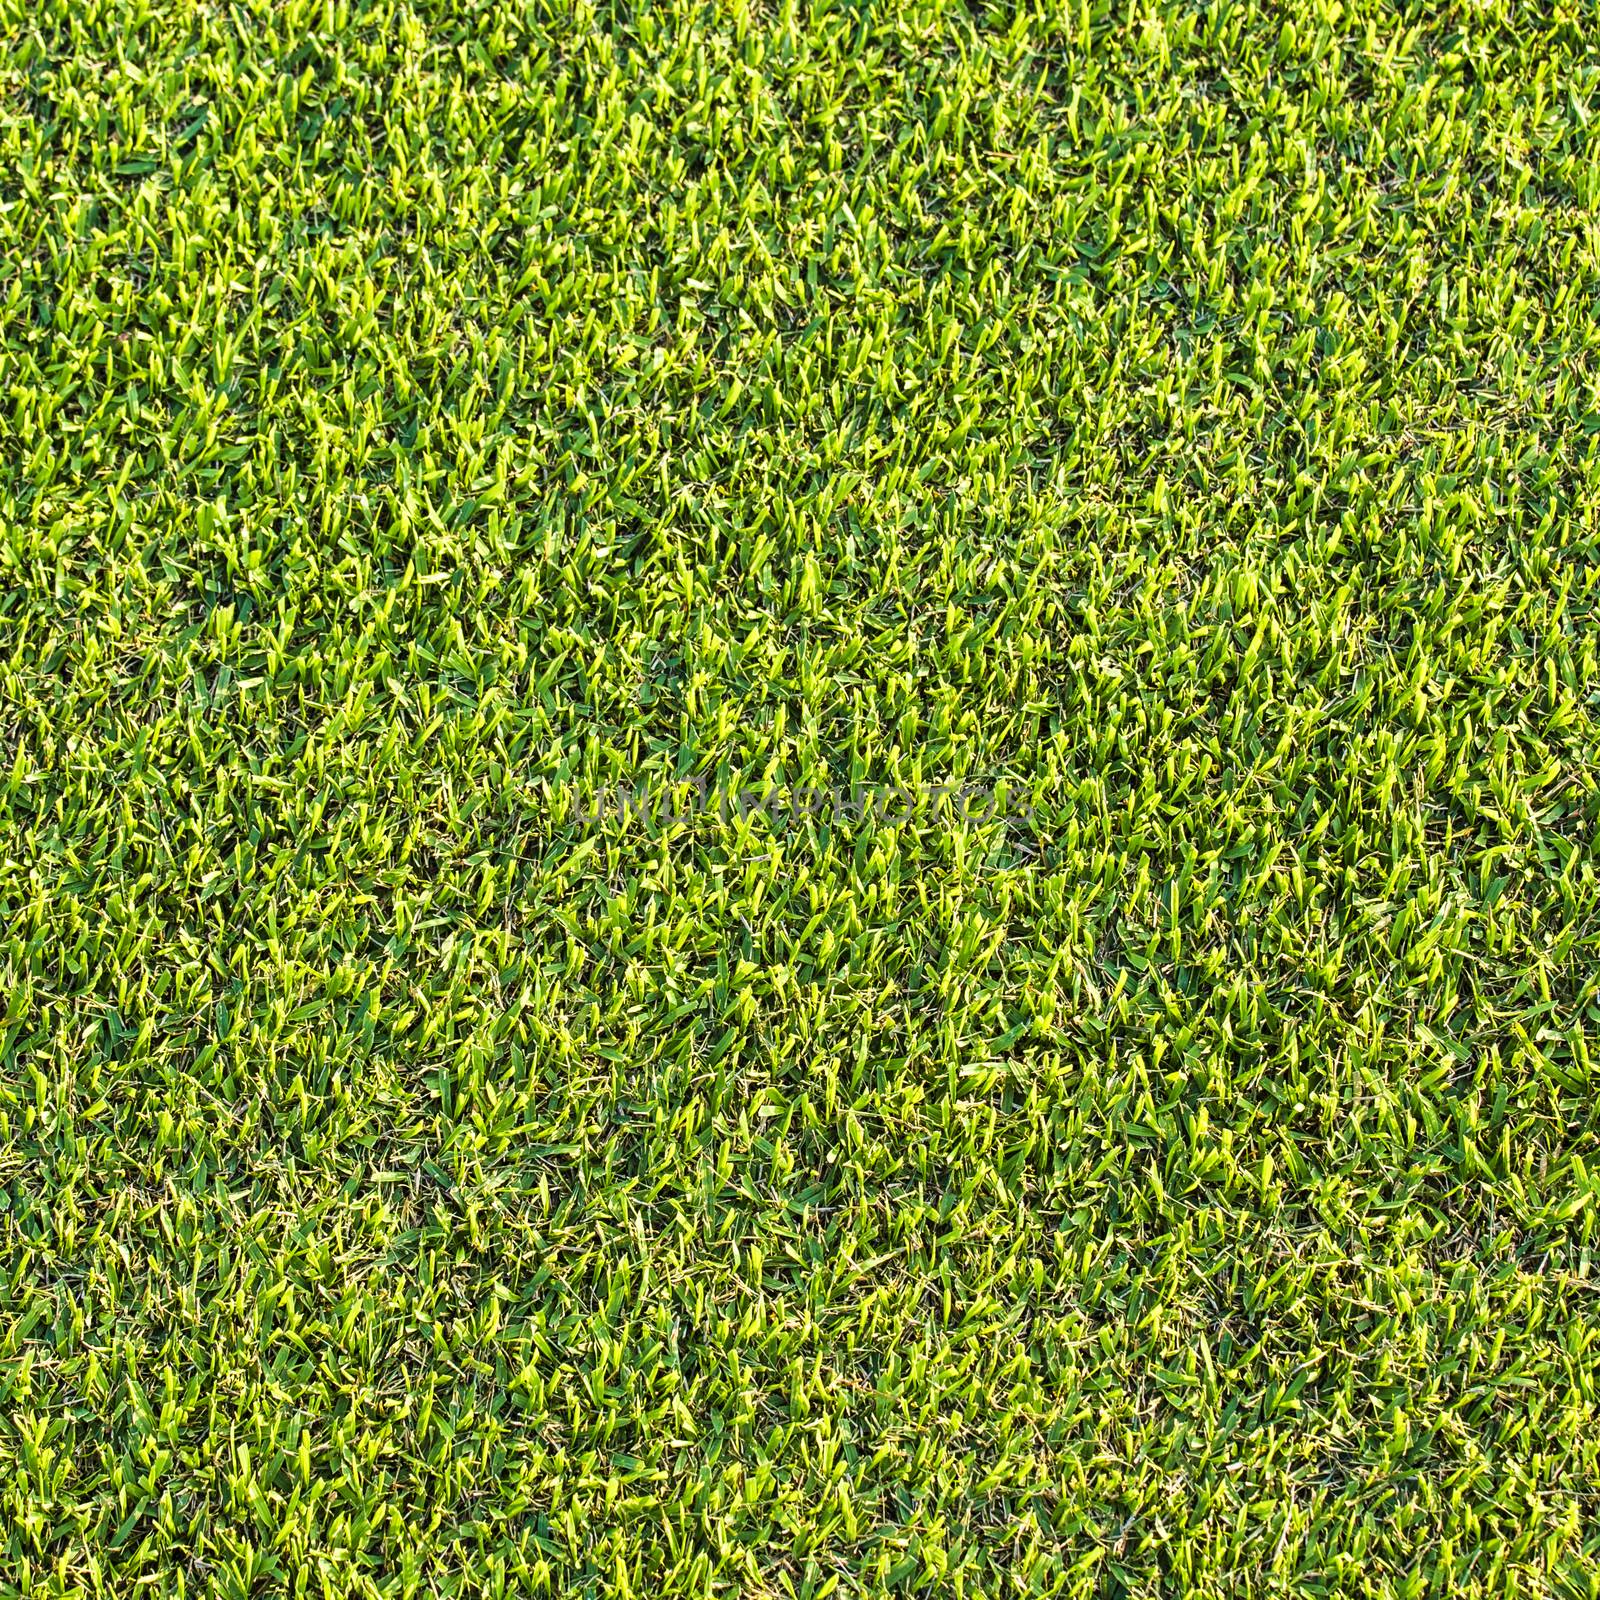 Green grass texture and backgrounds